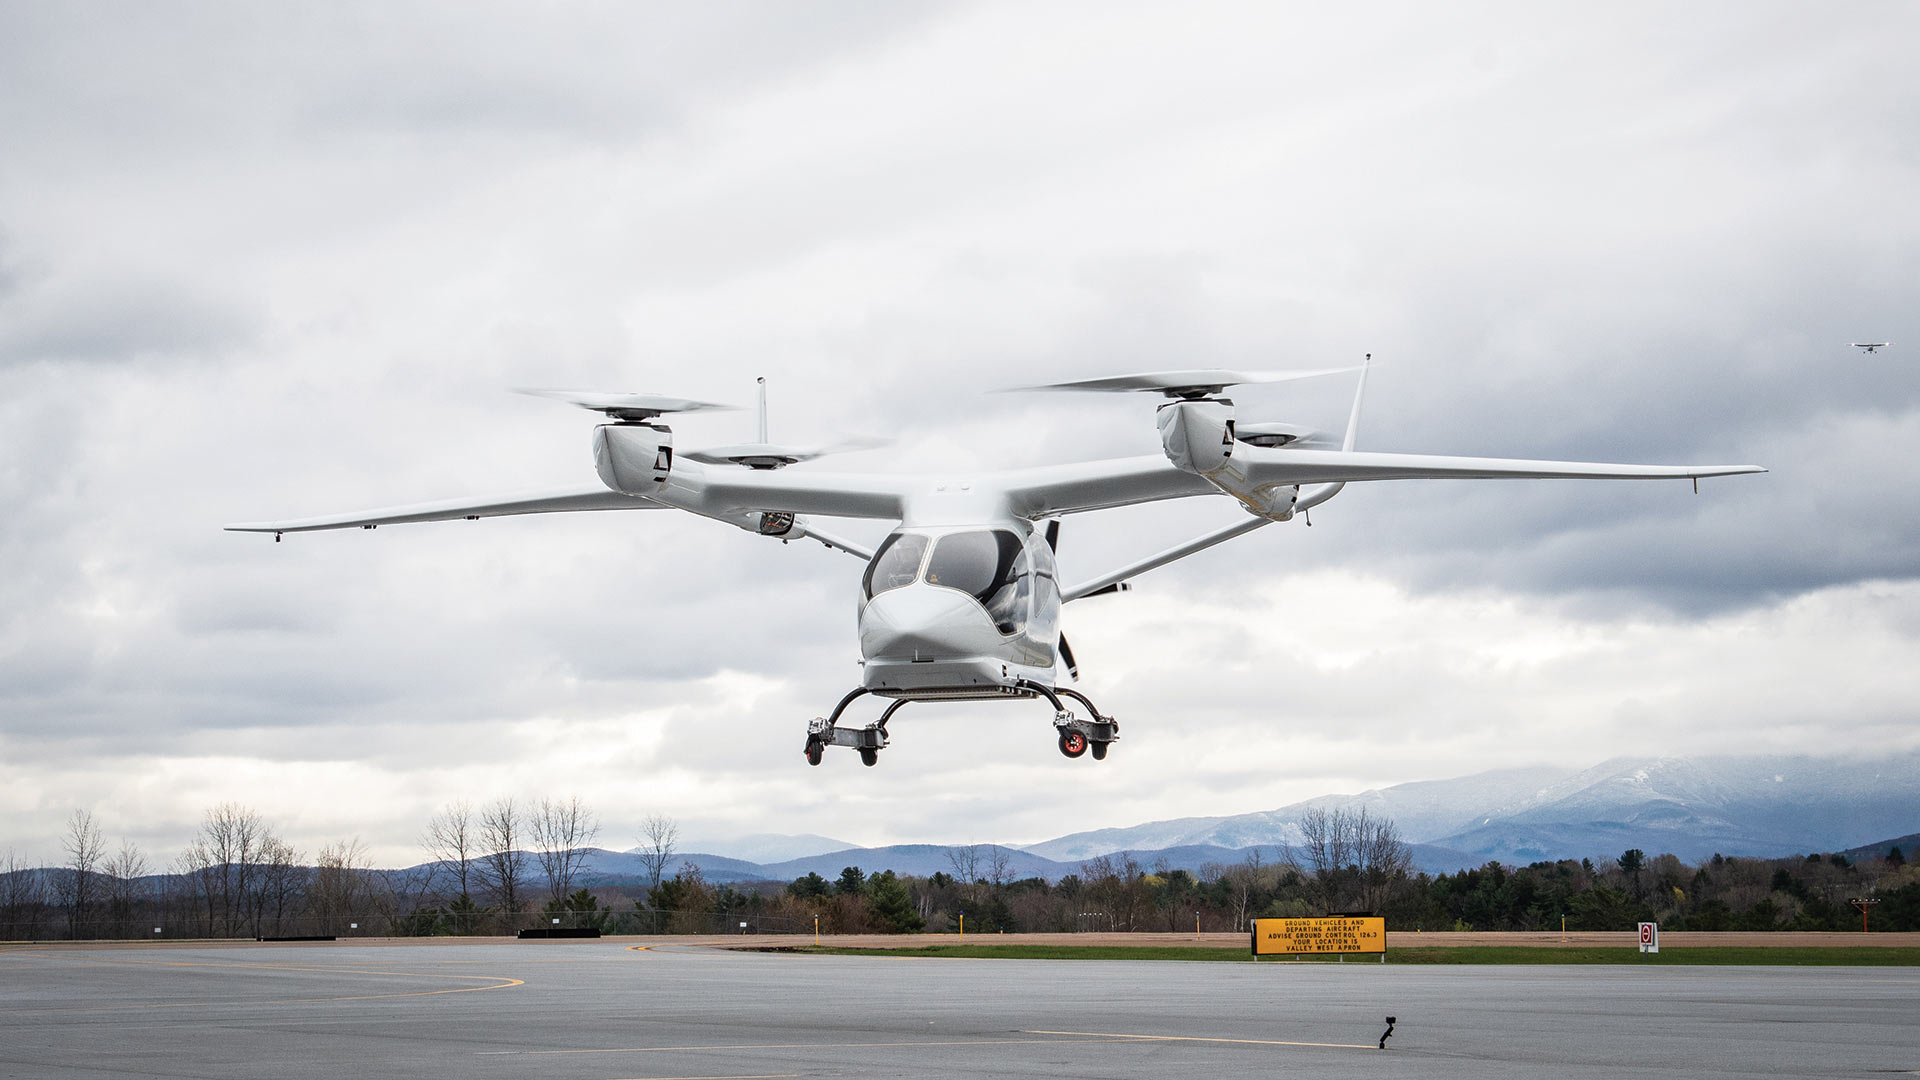 Air New Zealand’s Electric Aviation Revolution